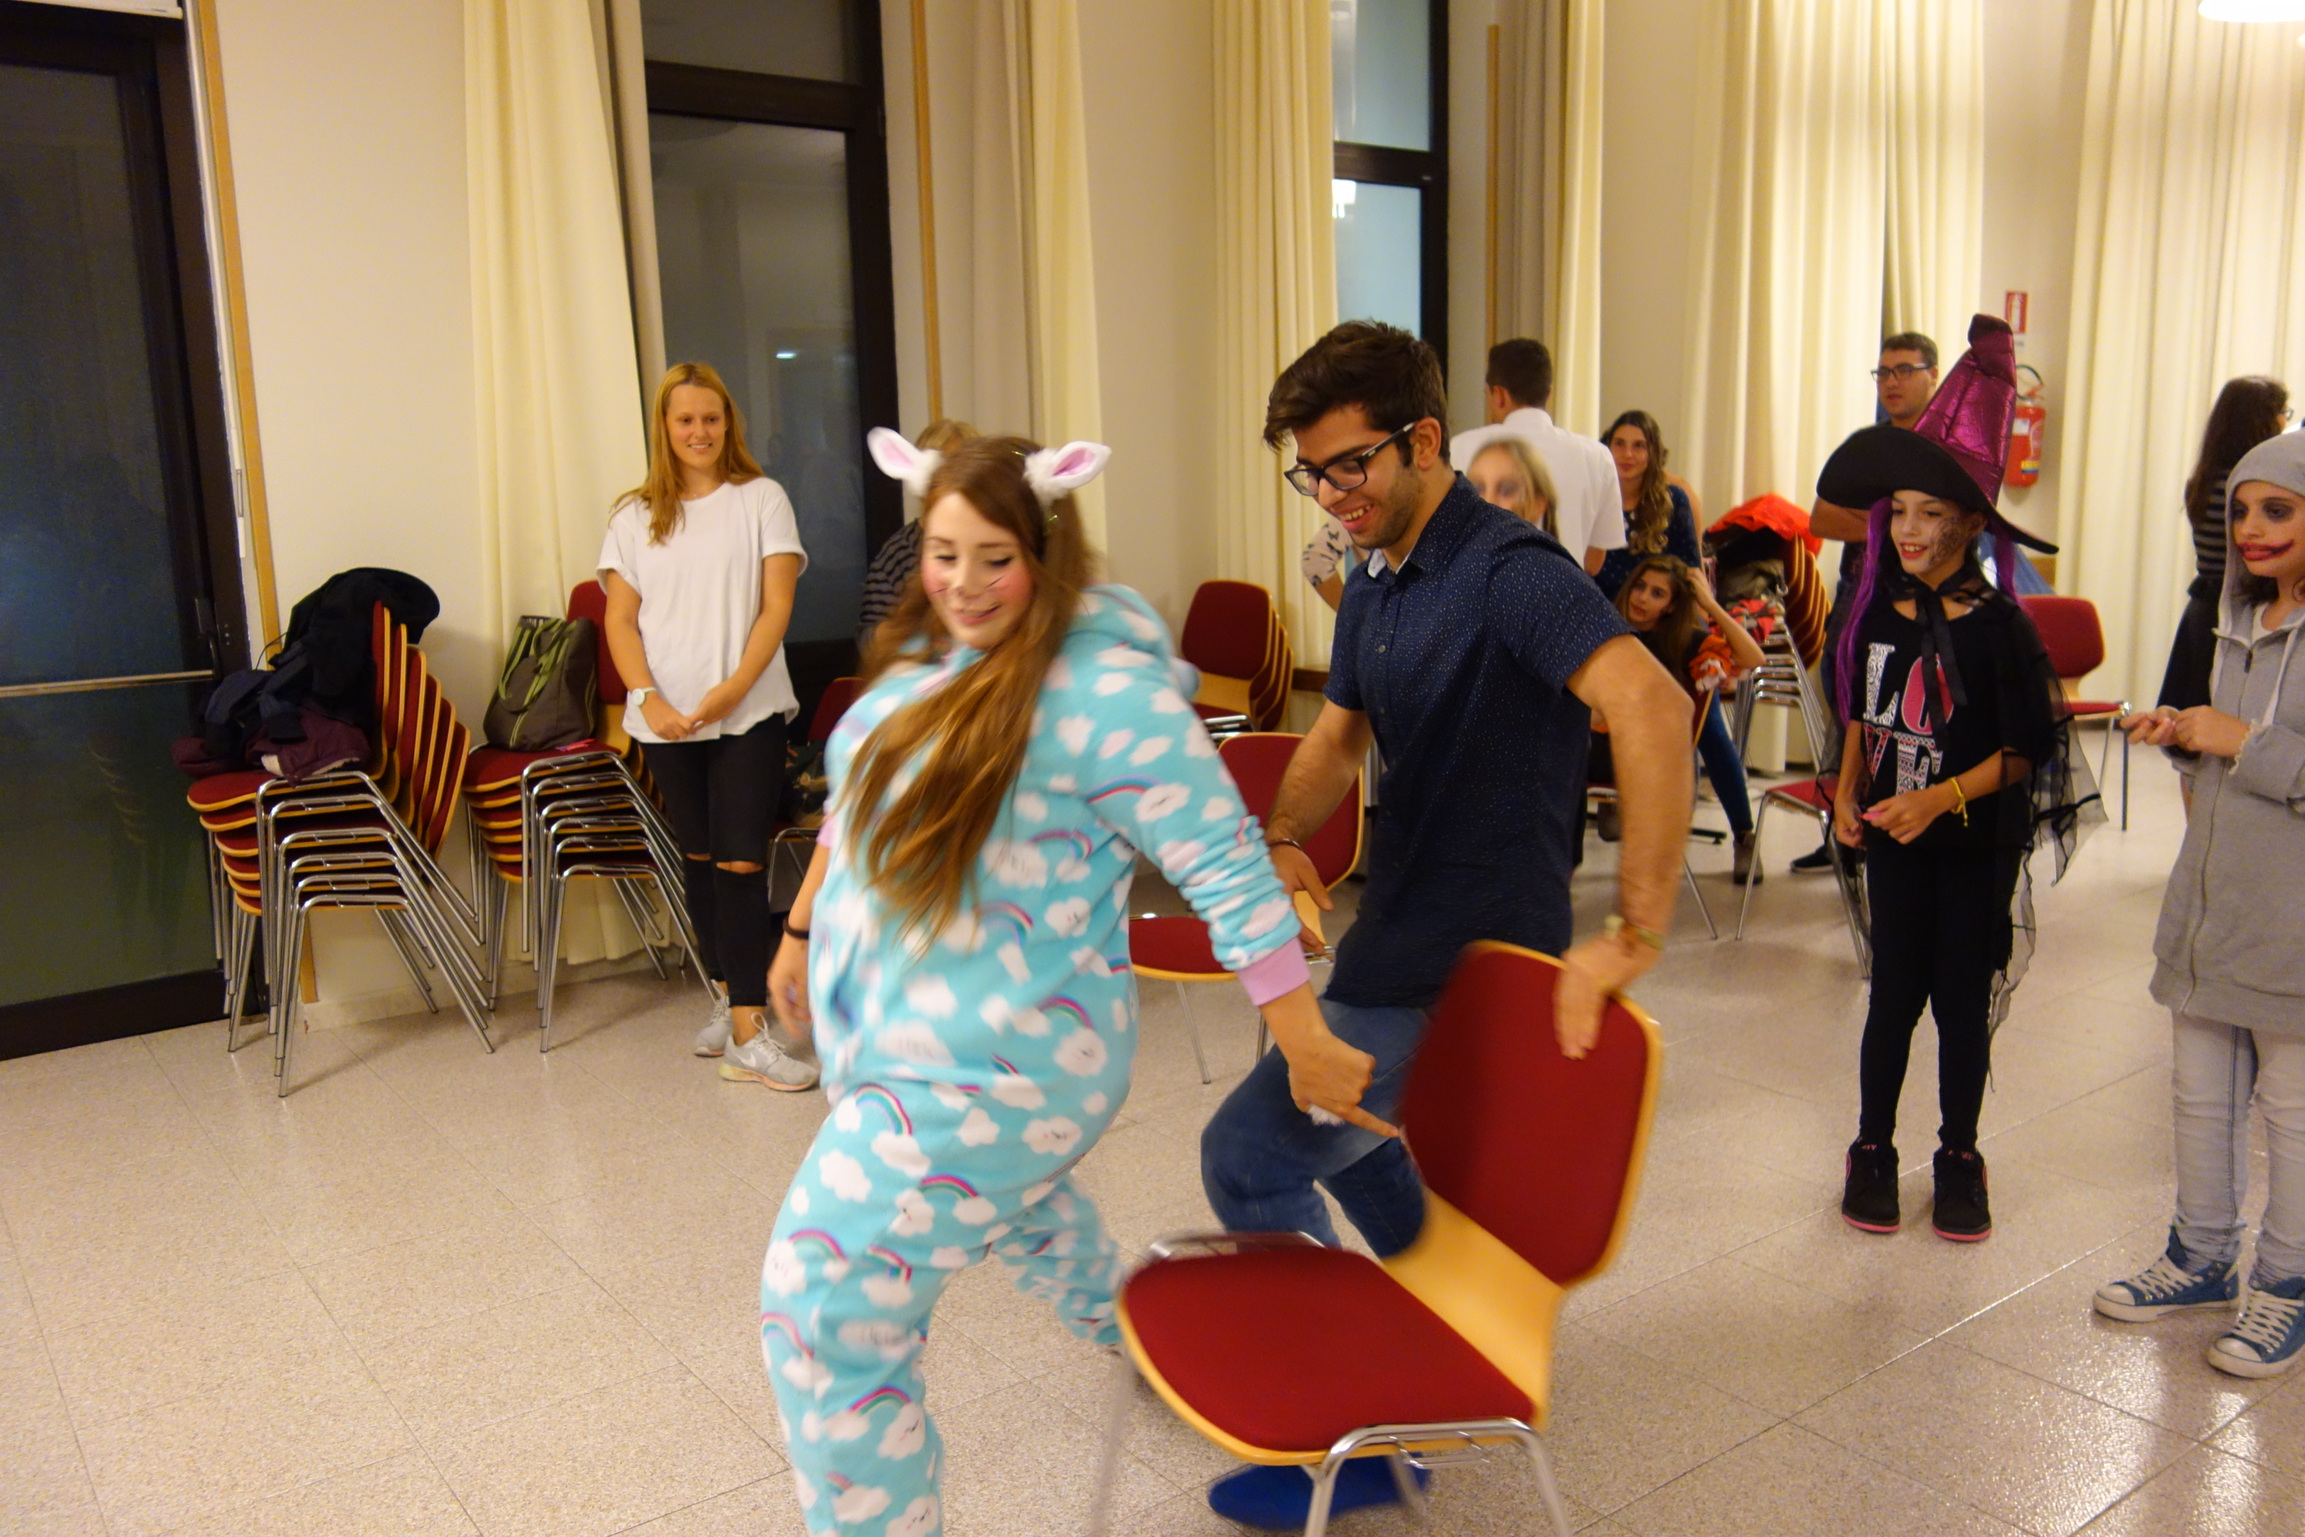 Catania Ward Halloween Party, October, 2016.  Playing musical chairs.